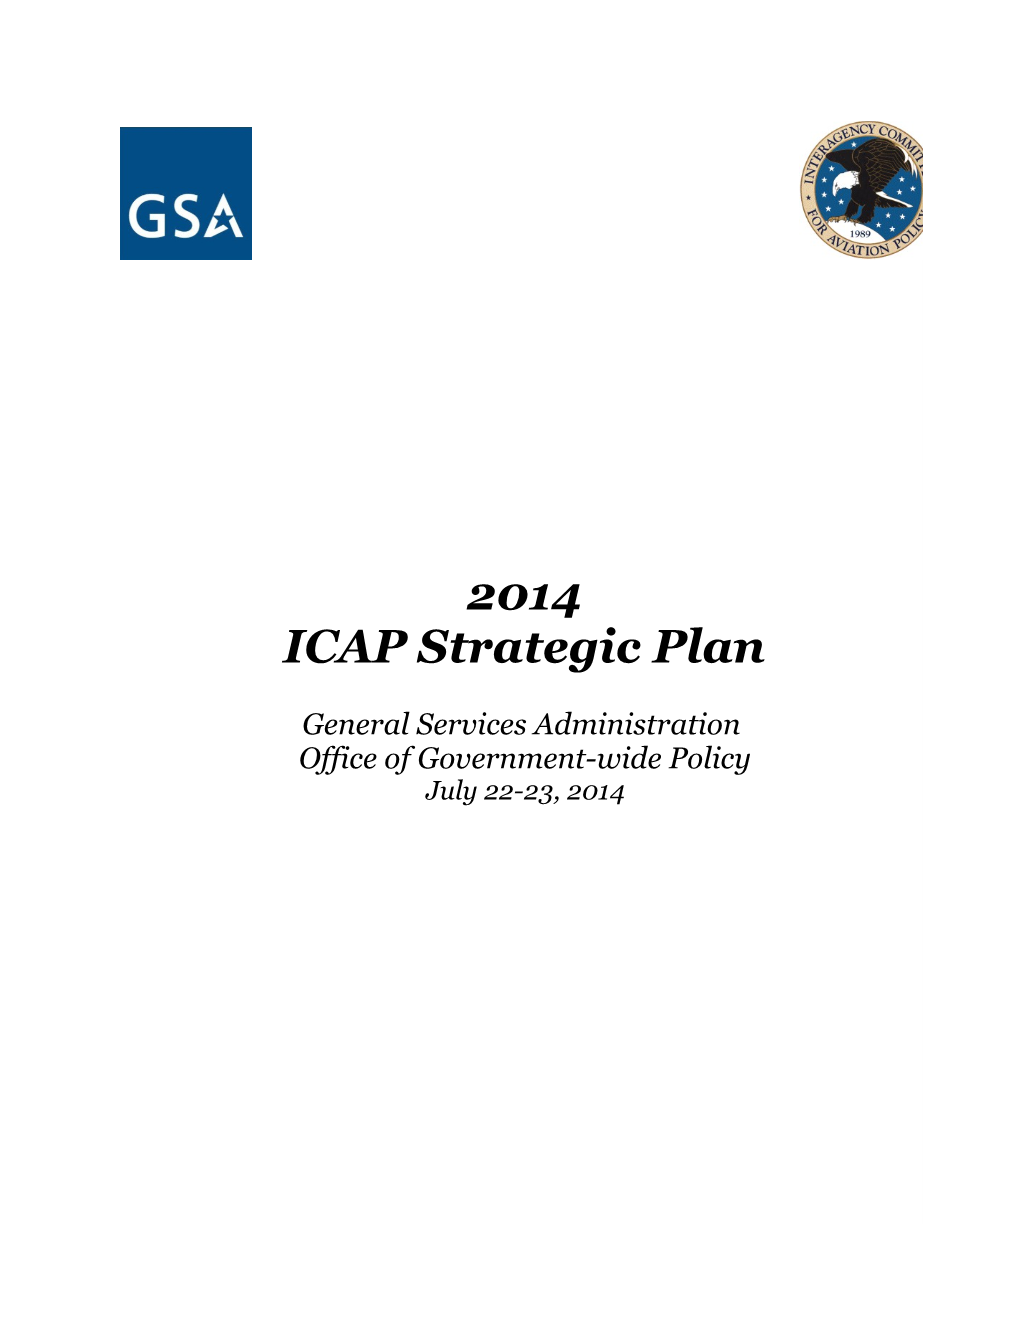 2014 ICAP Strategic Plan General Services Administration, Office of Government-Wide Policy